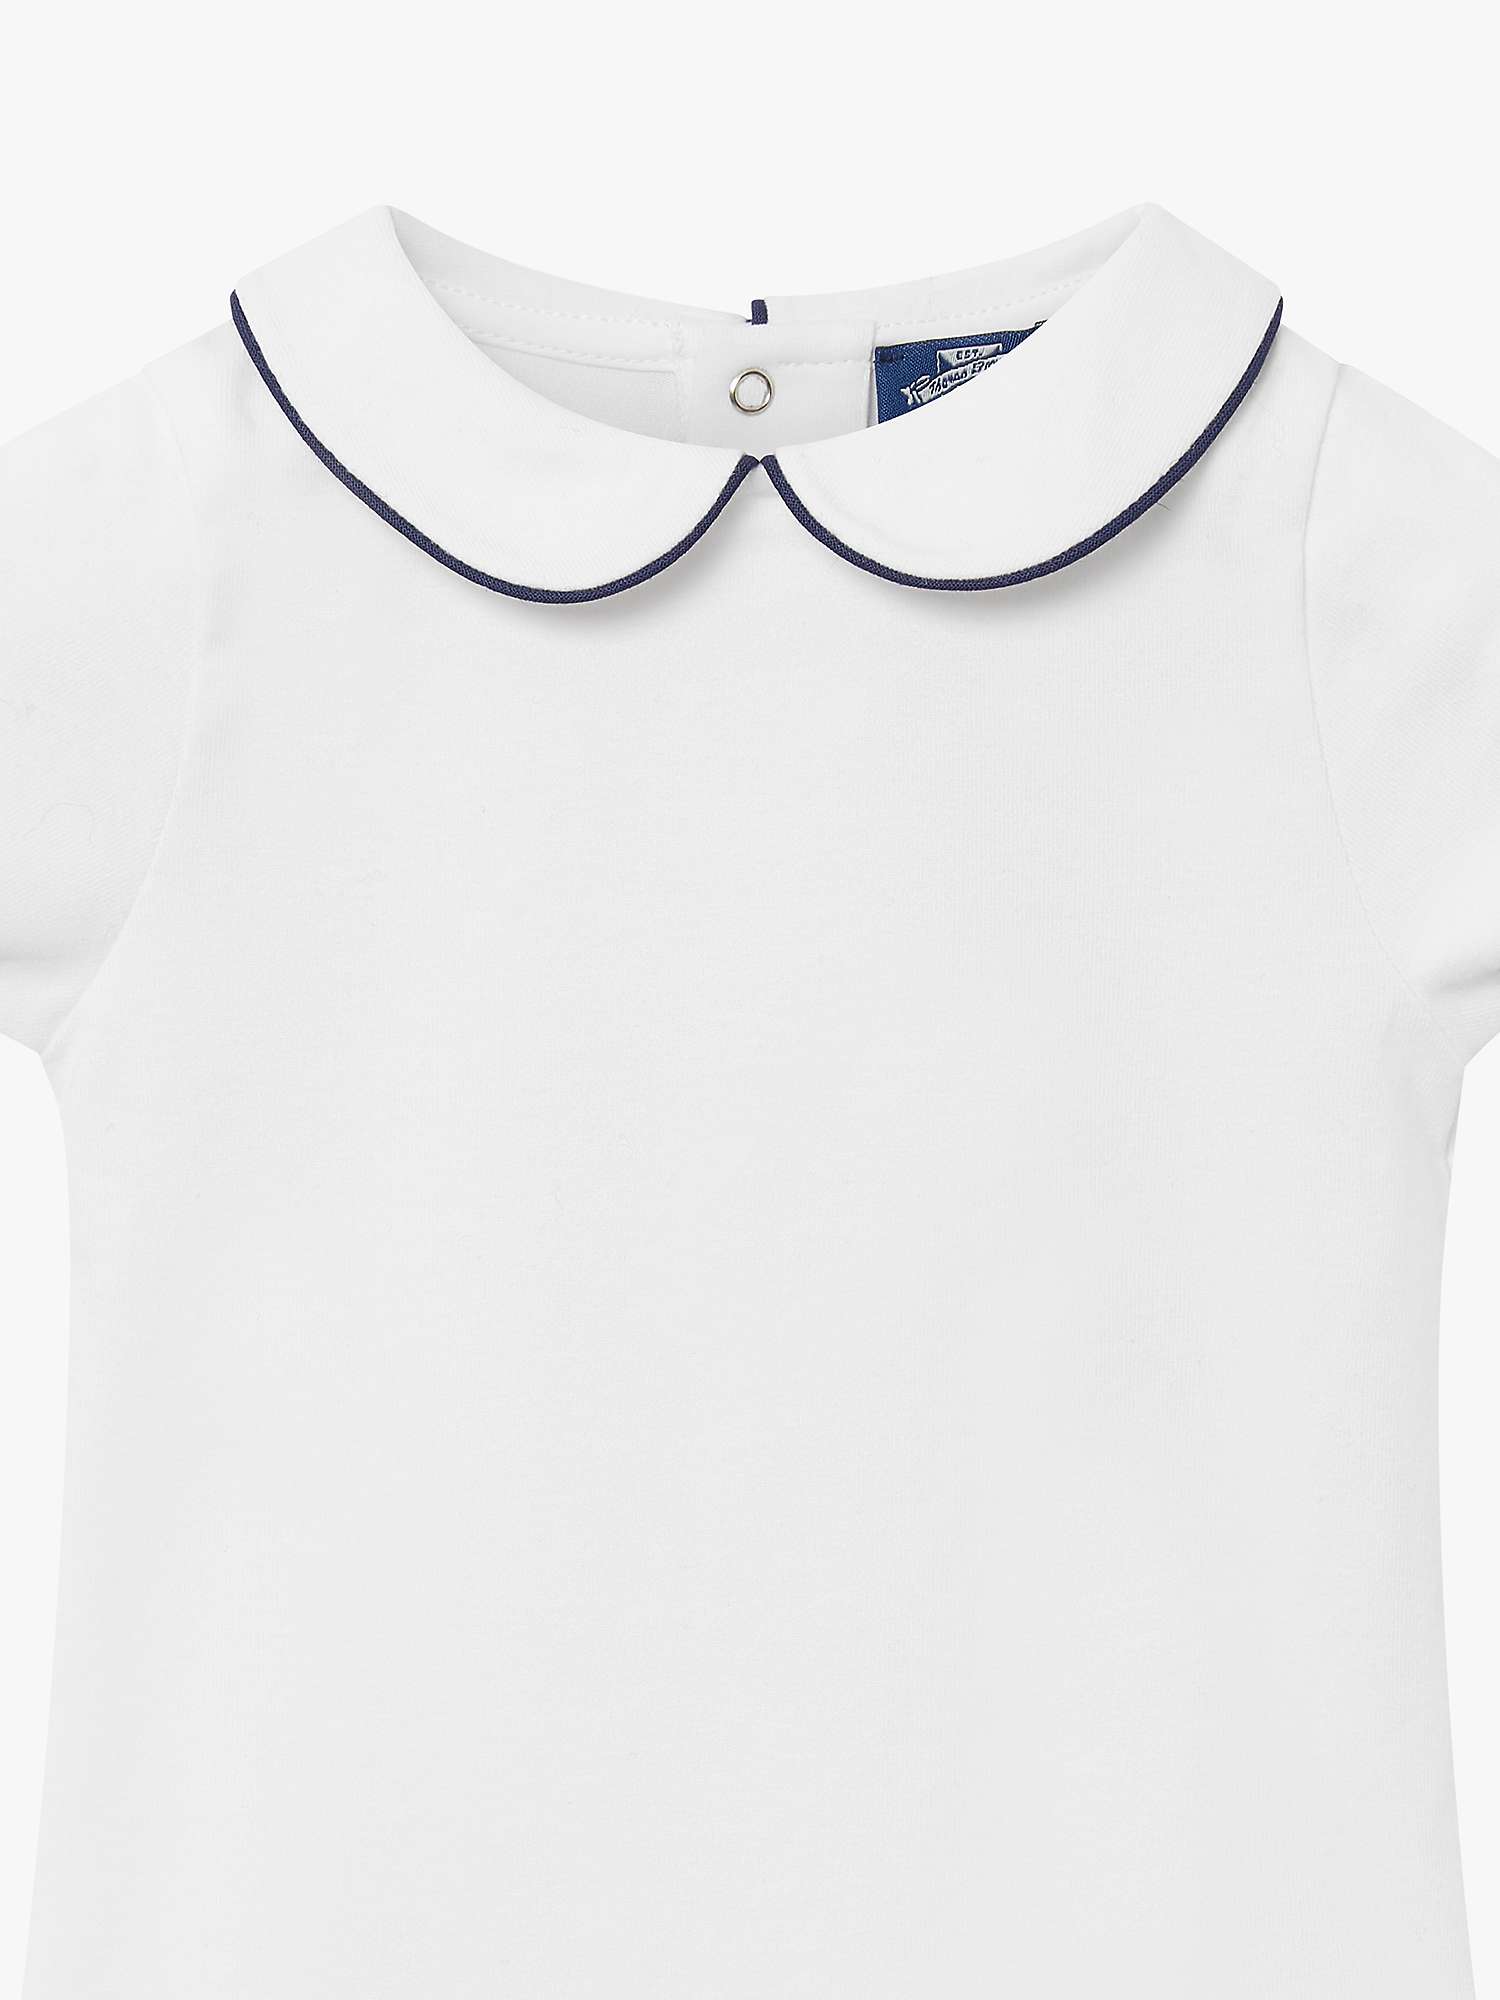 Buy Trotters Thomas Brown Baby Milo Piped Short Sleeve Jersey Bodysuit Online at johnlewis.com